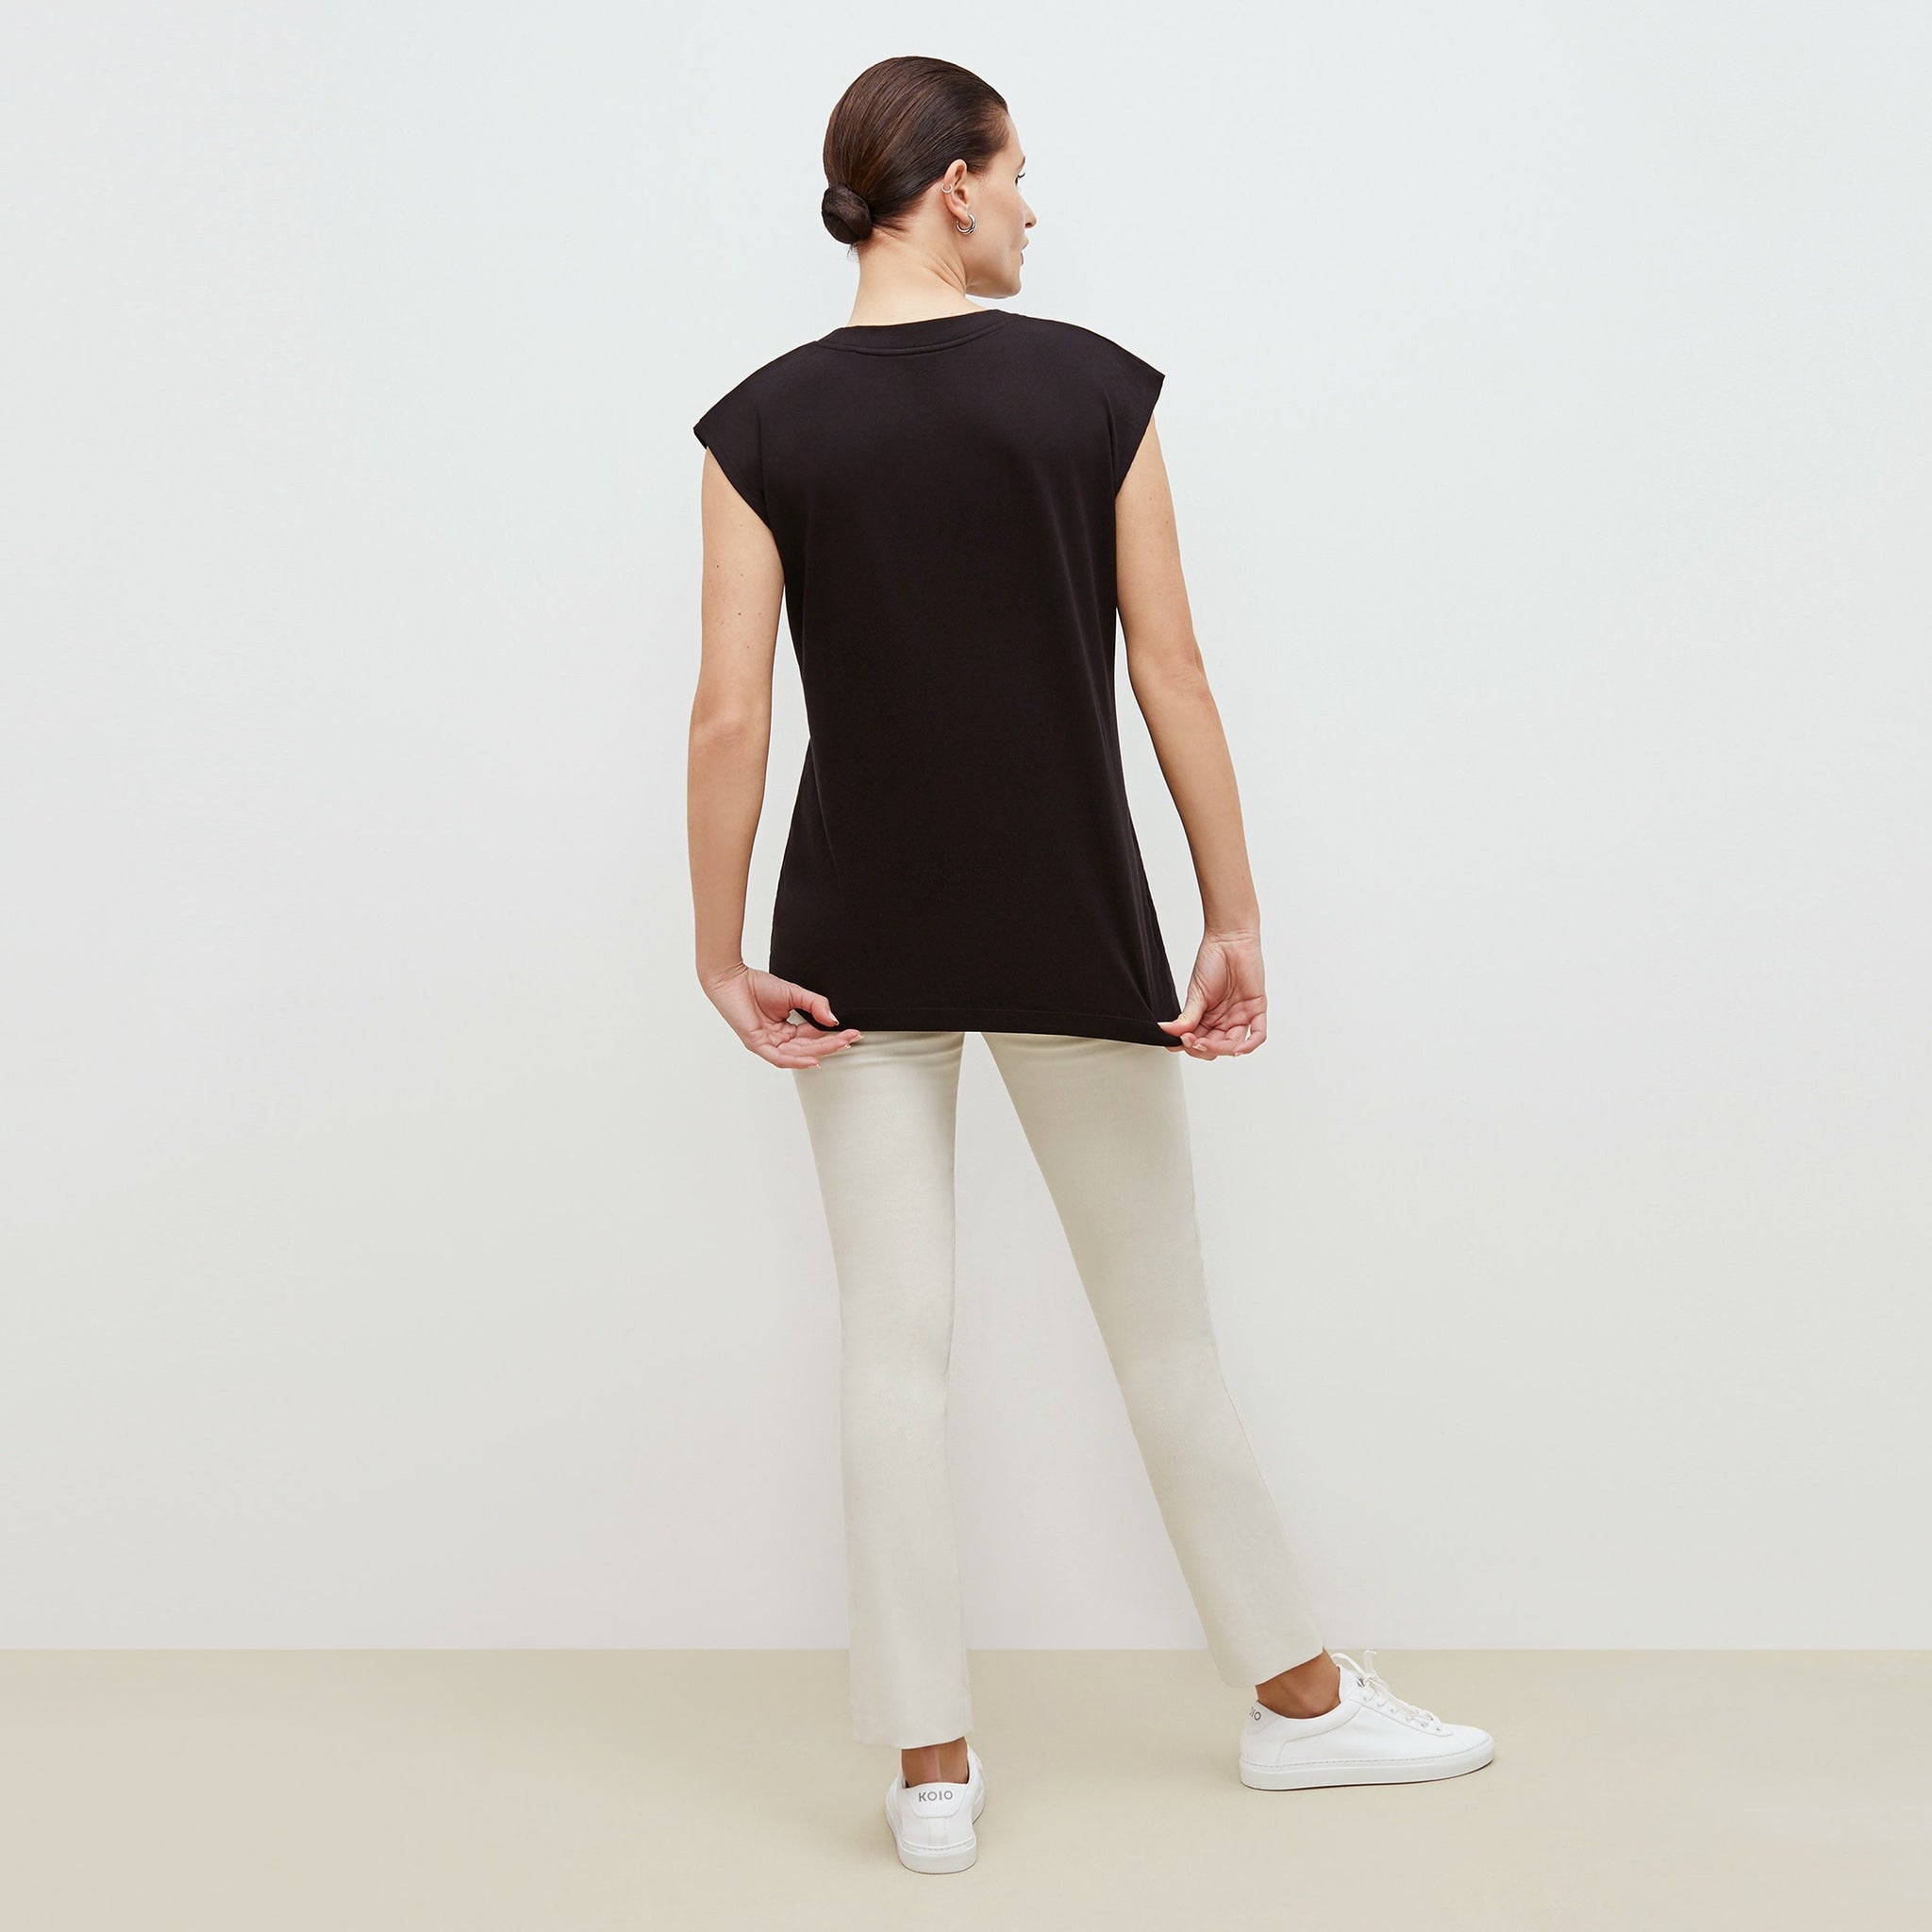 Back image of a woman standing wearing the alina top in compact cotton in black